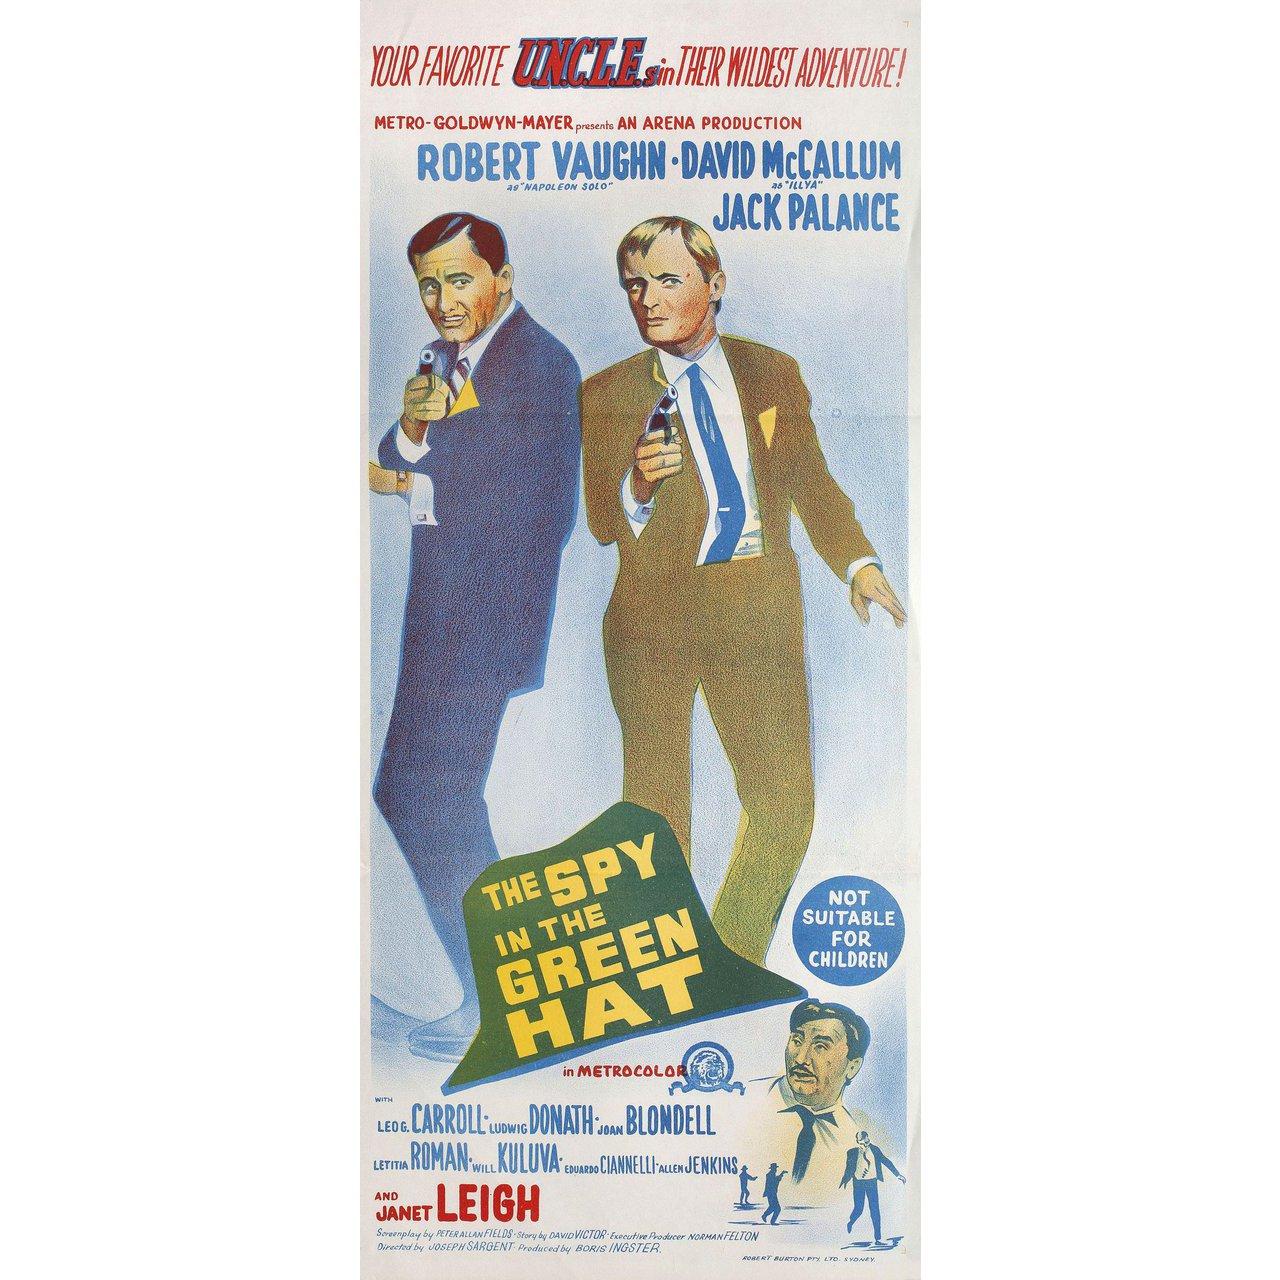 Original 1967 Australian daybill poster for the film “The Spy in the Green Hat” directed by Joseph Sargent with Robert Vaughn / David McCallum / Jack Palance / Janet Leigh. Very good-fine condition, folded. Many original posters were issued folded